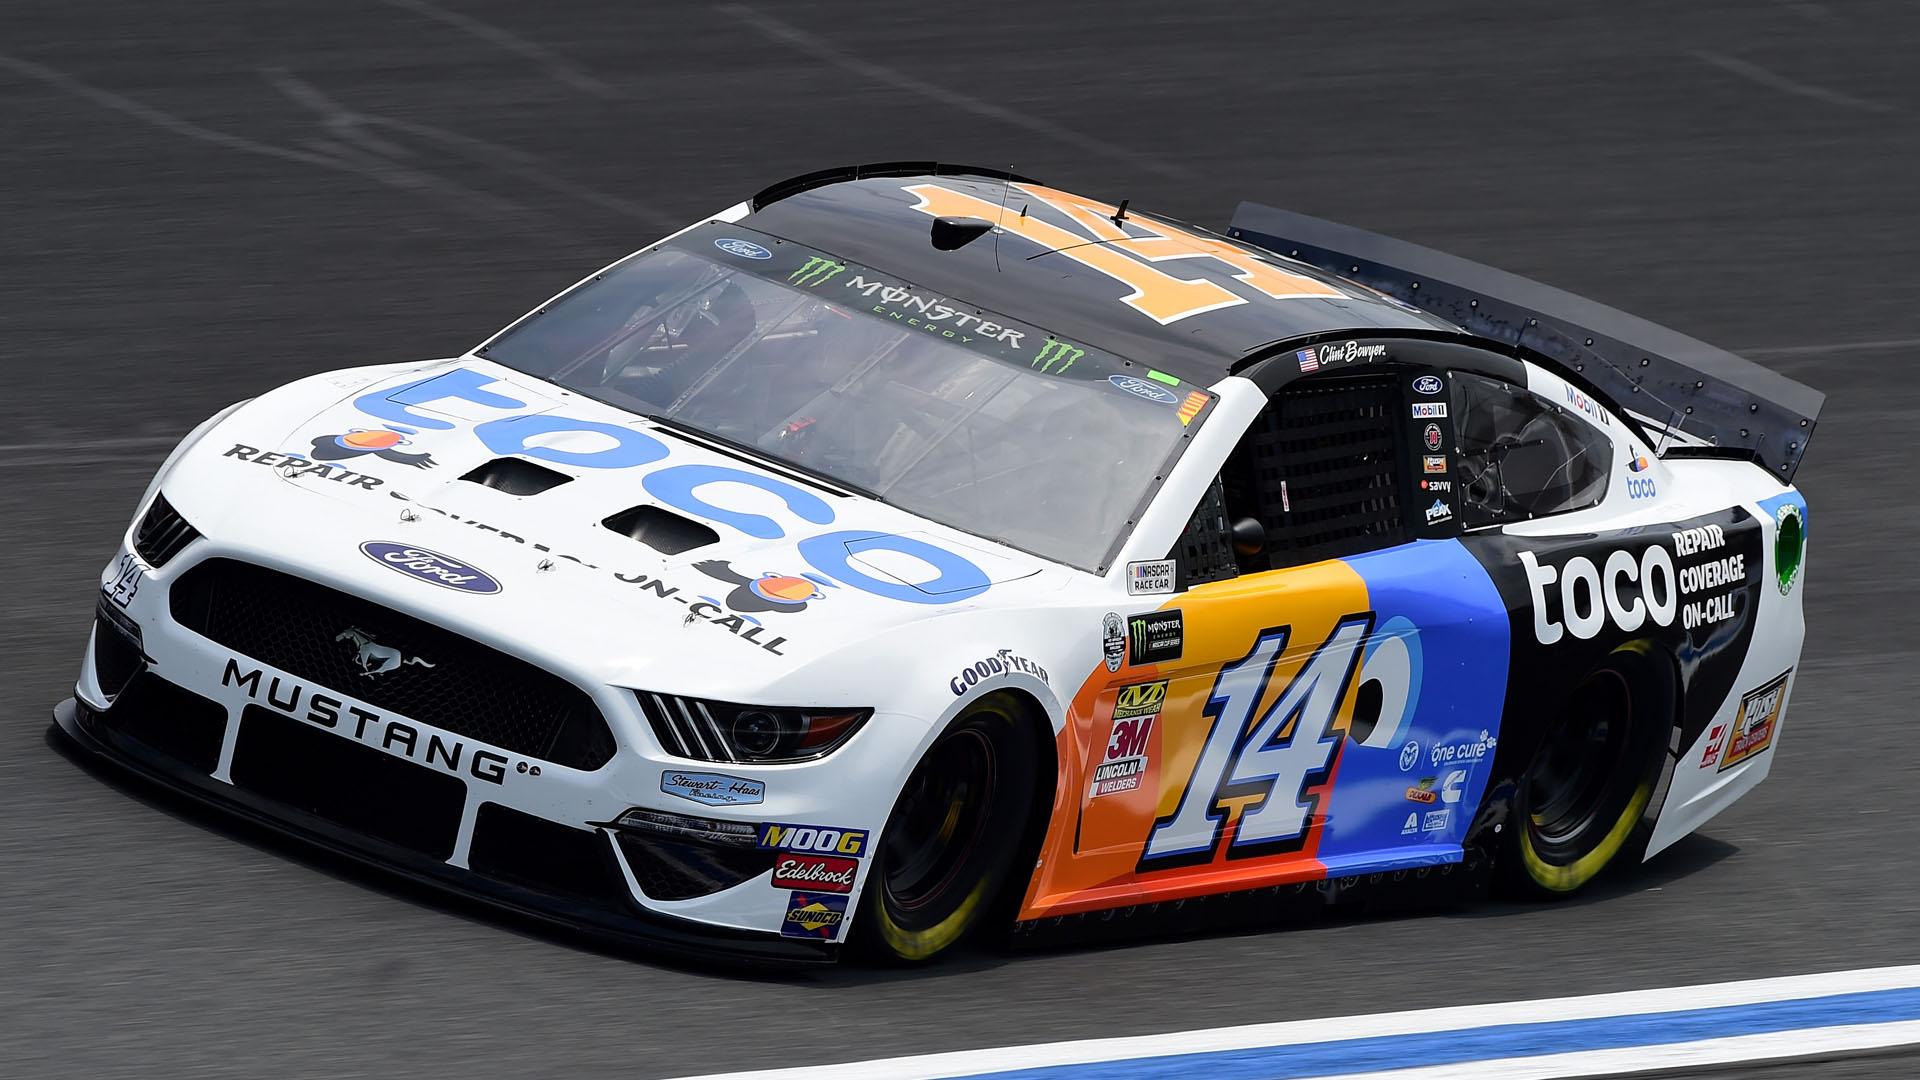 NASCAR All Star Race 2019 Starting Lineup: Clint Bowyer On Pole